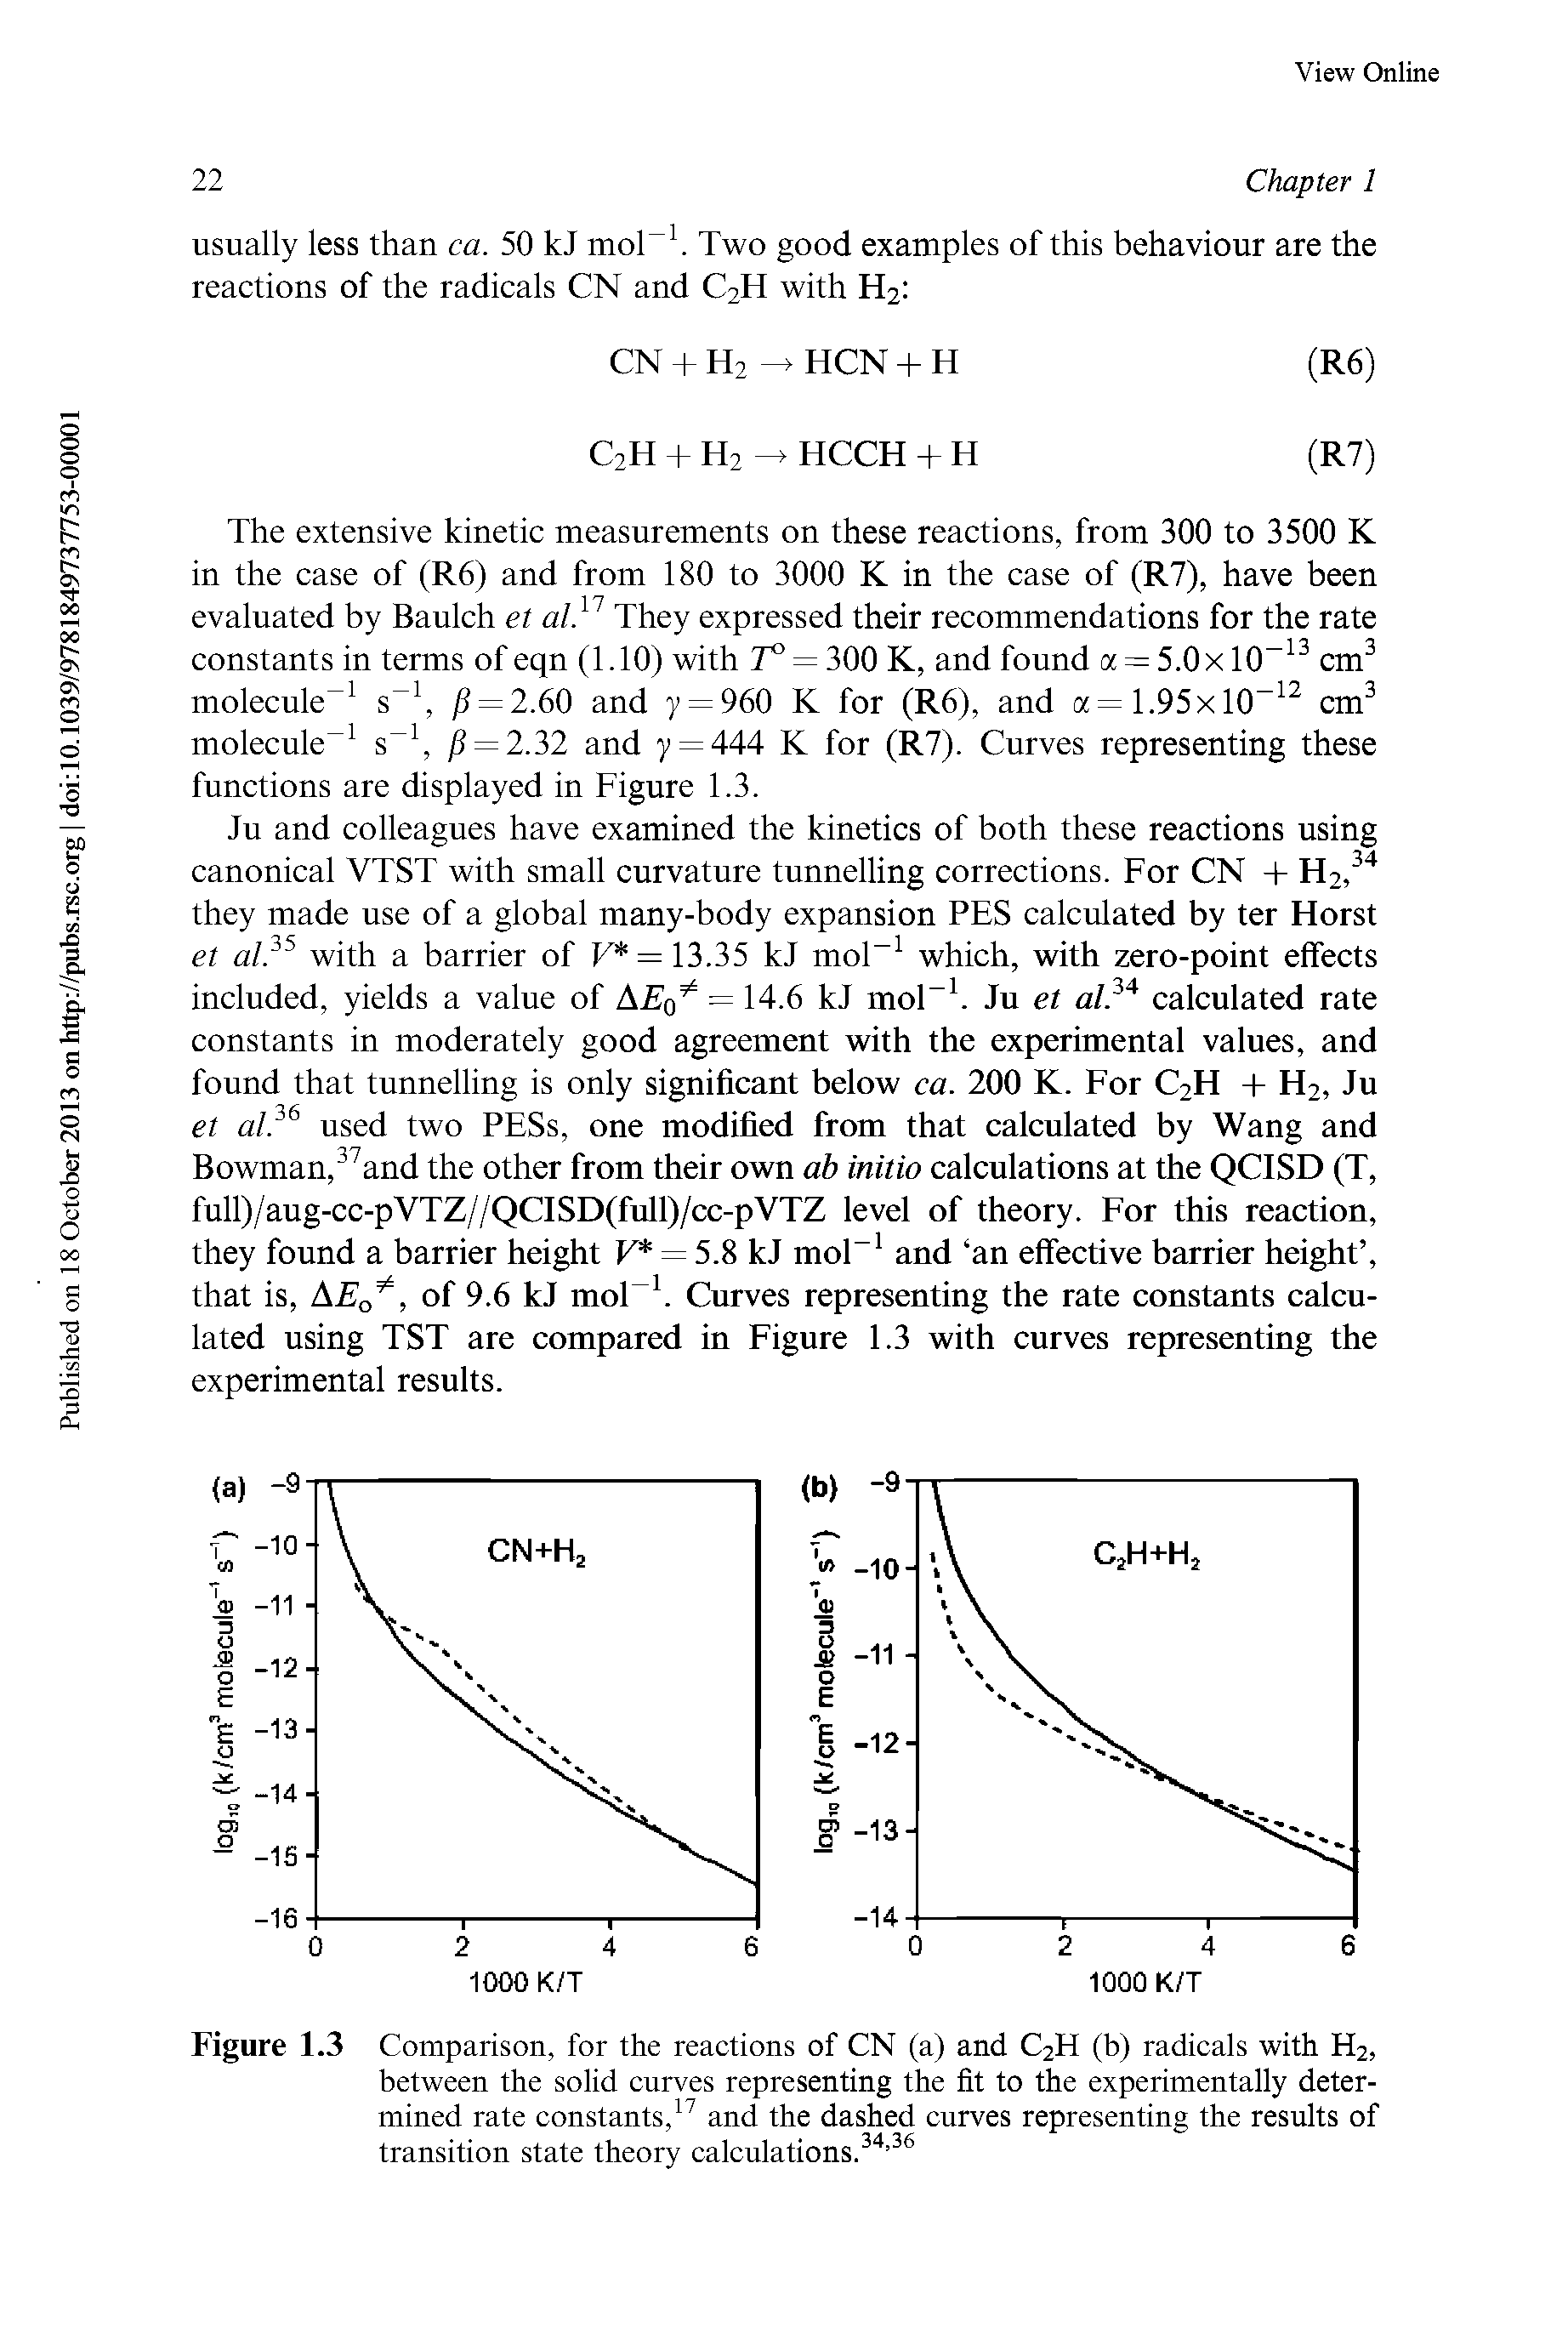 Figure 1.3 Comparison, for the reactions of CN (a) and C2H (b) radicals with H2, between the solid curves representing the fit to the experimentally determined rate constants,and the dashed curves representing the results of transition state theory calculations. " ...